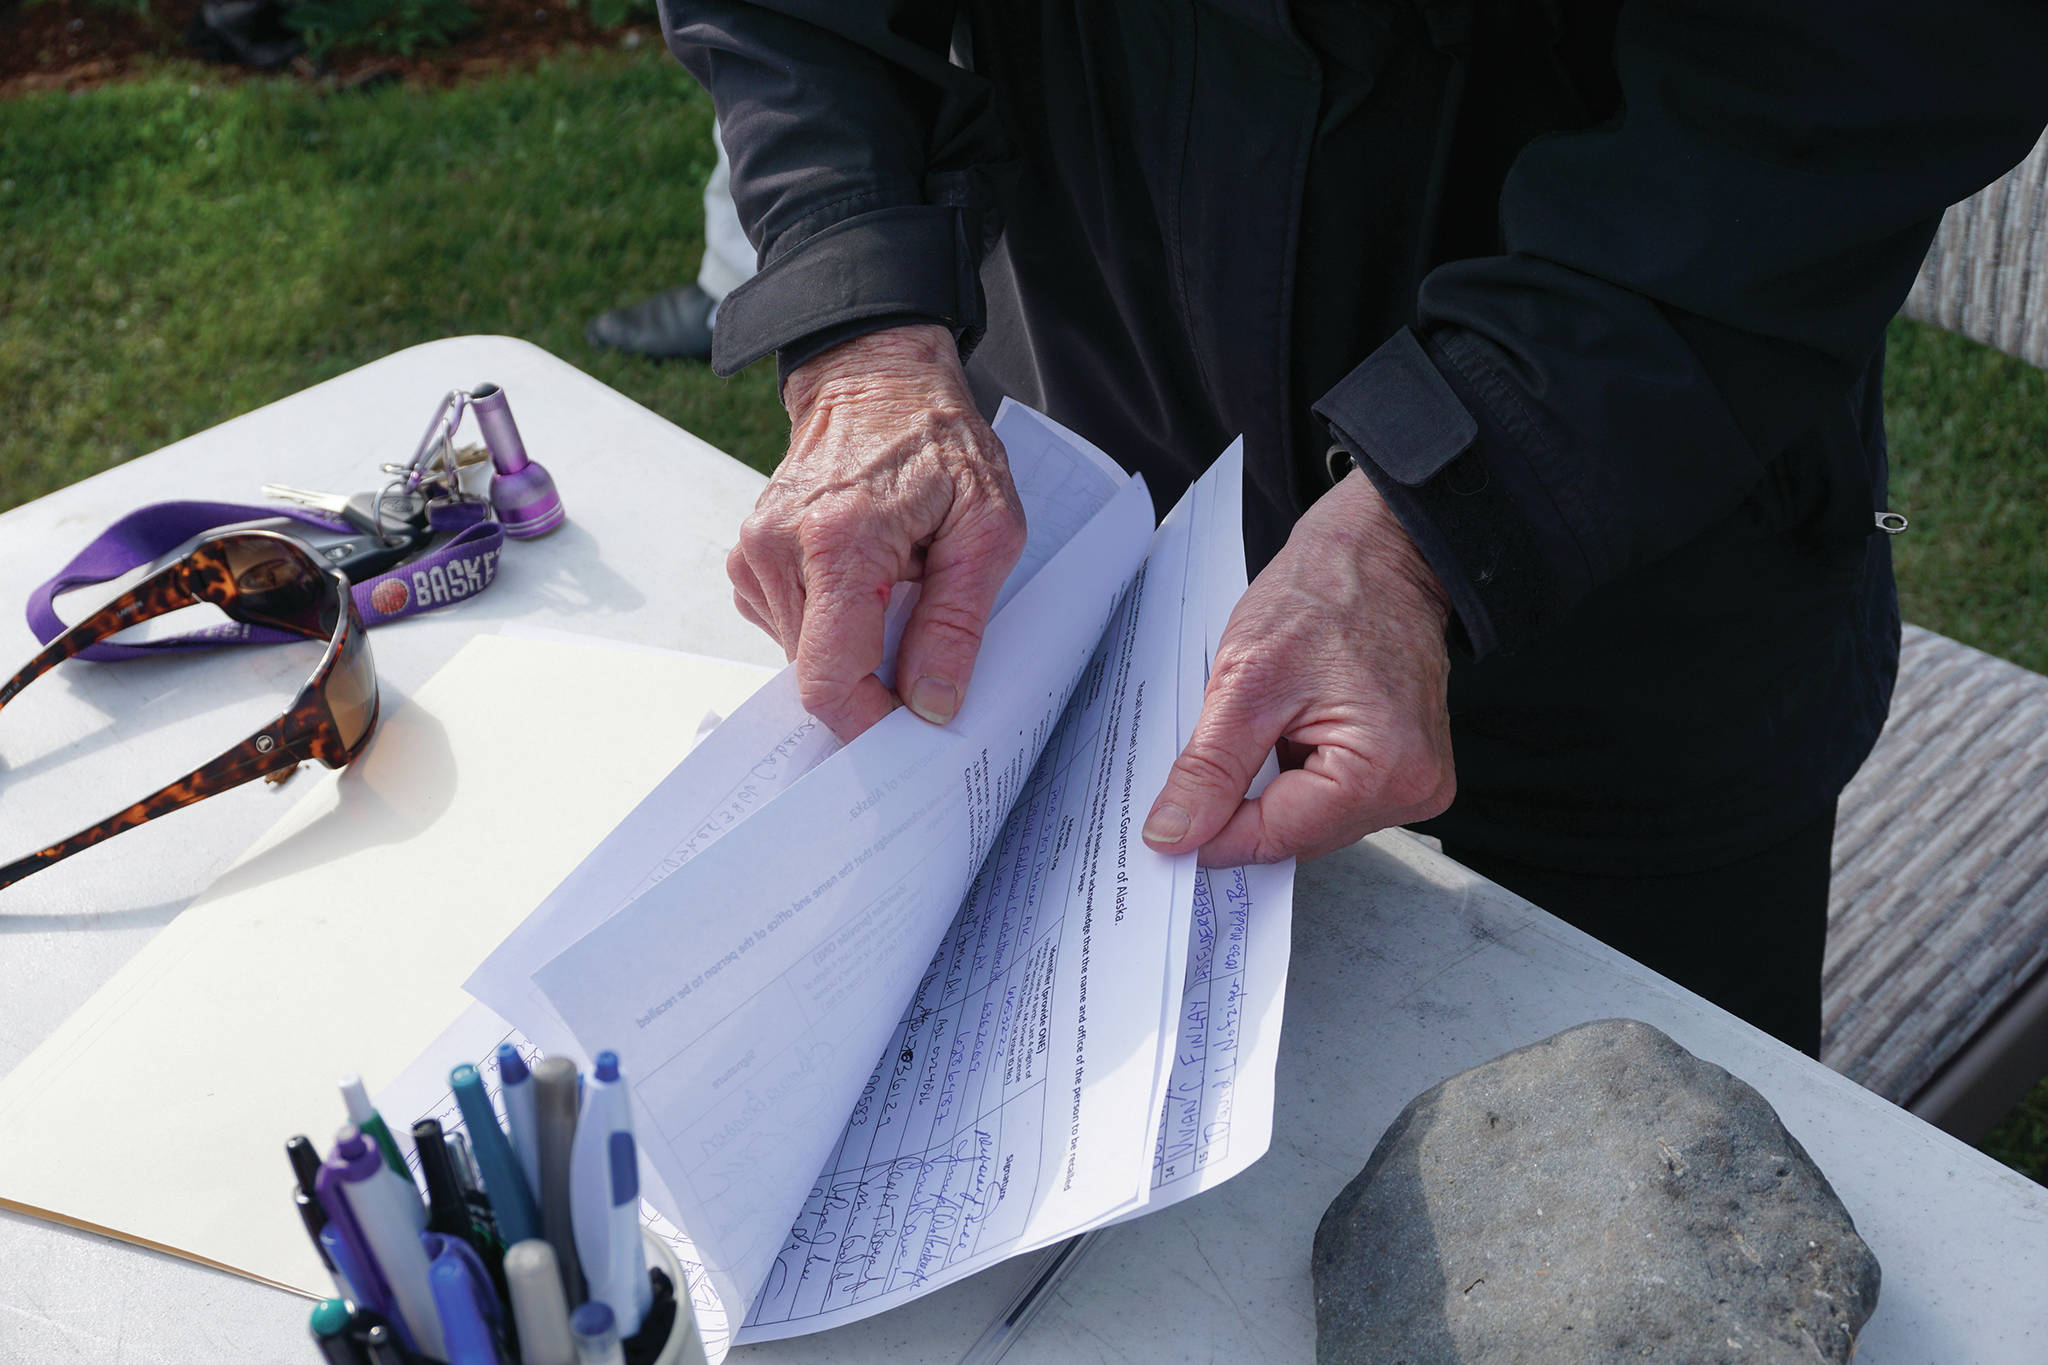 Recall Dunleavy organizer Kathy Carssow flips through pages of signed forms to get a tally at a Recall Dunleavy rally held on Aug. 1, 2019, at WKFL Park in Homer, Alaska. (Photo by Michael Armstrong)